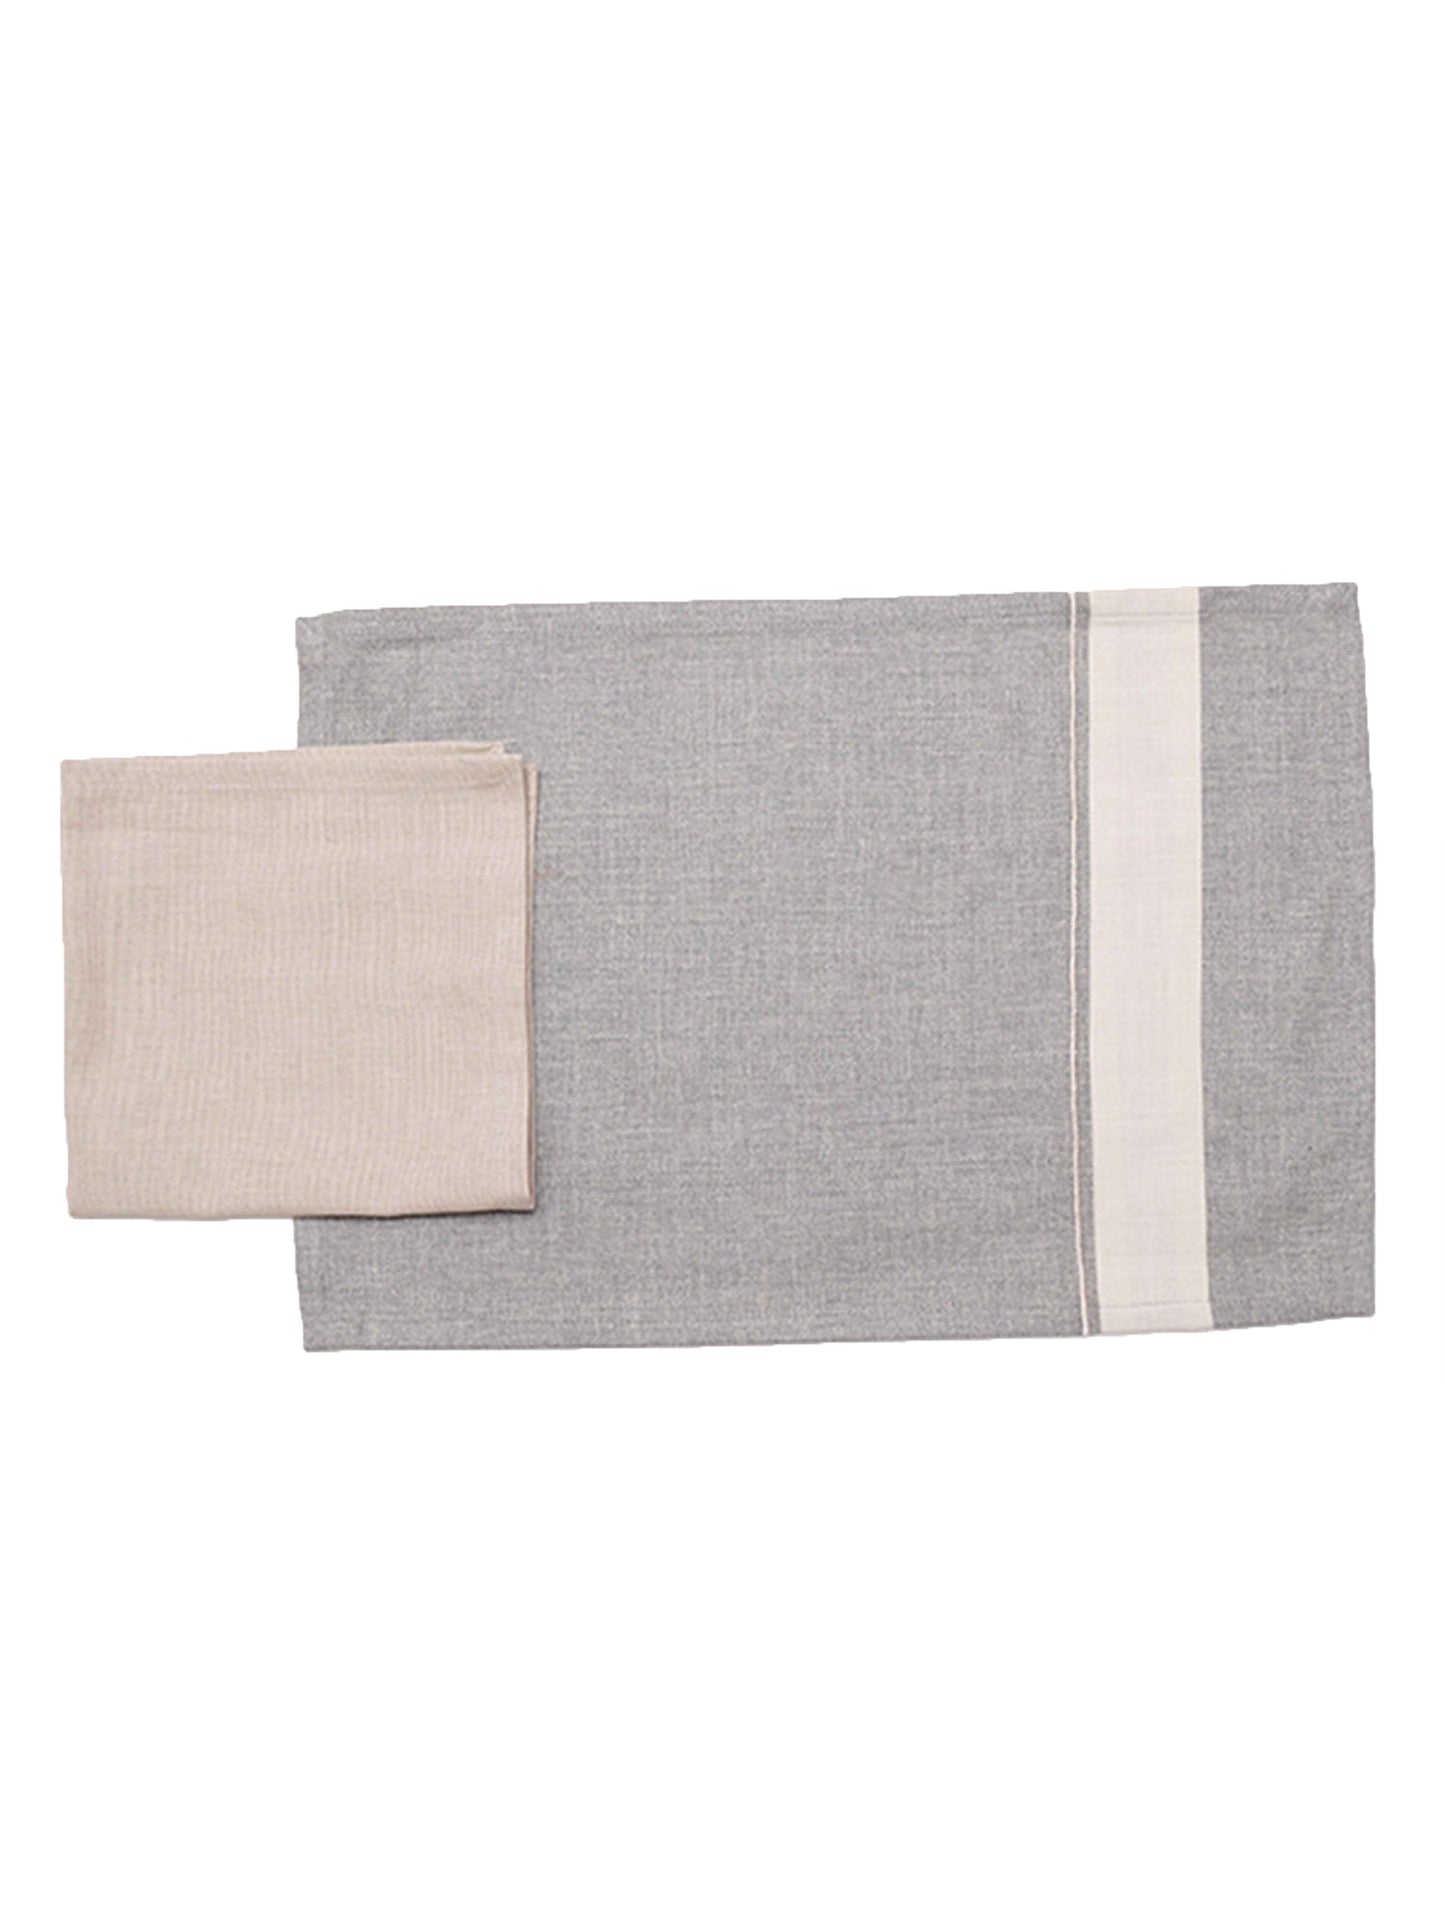 Table Mats and Napkins  Cotton Striped Grey and Beige - 13" x 19" ; 16" x 16" - Set of 6